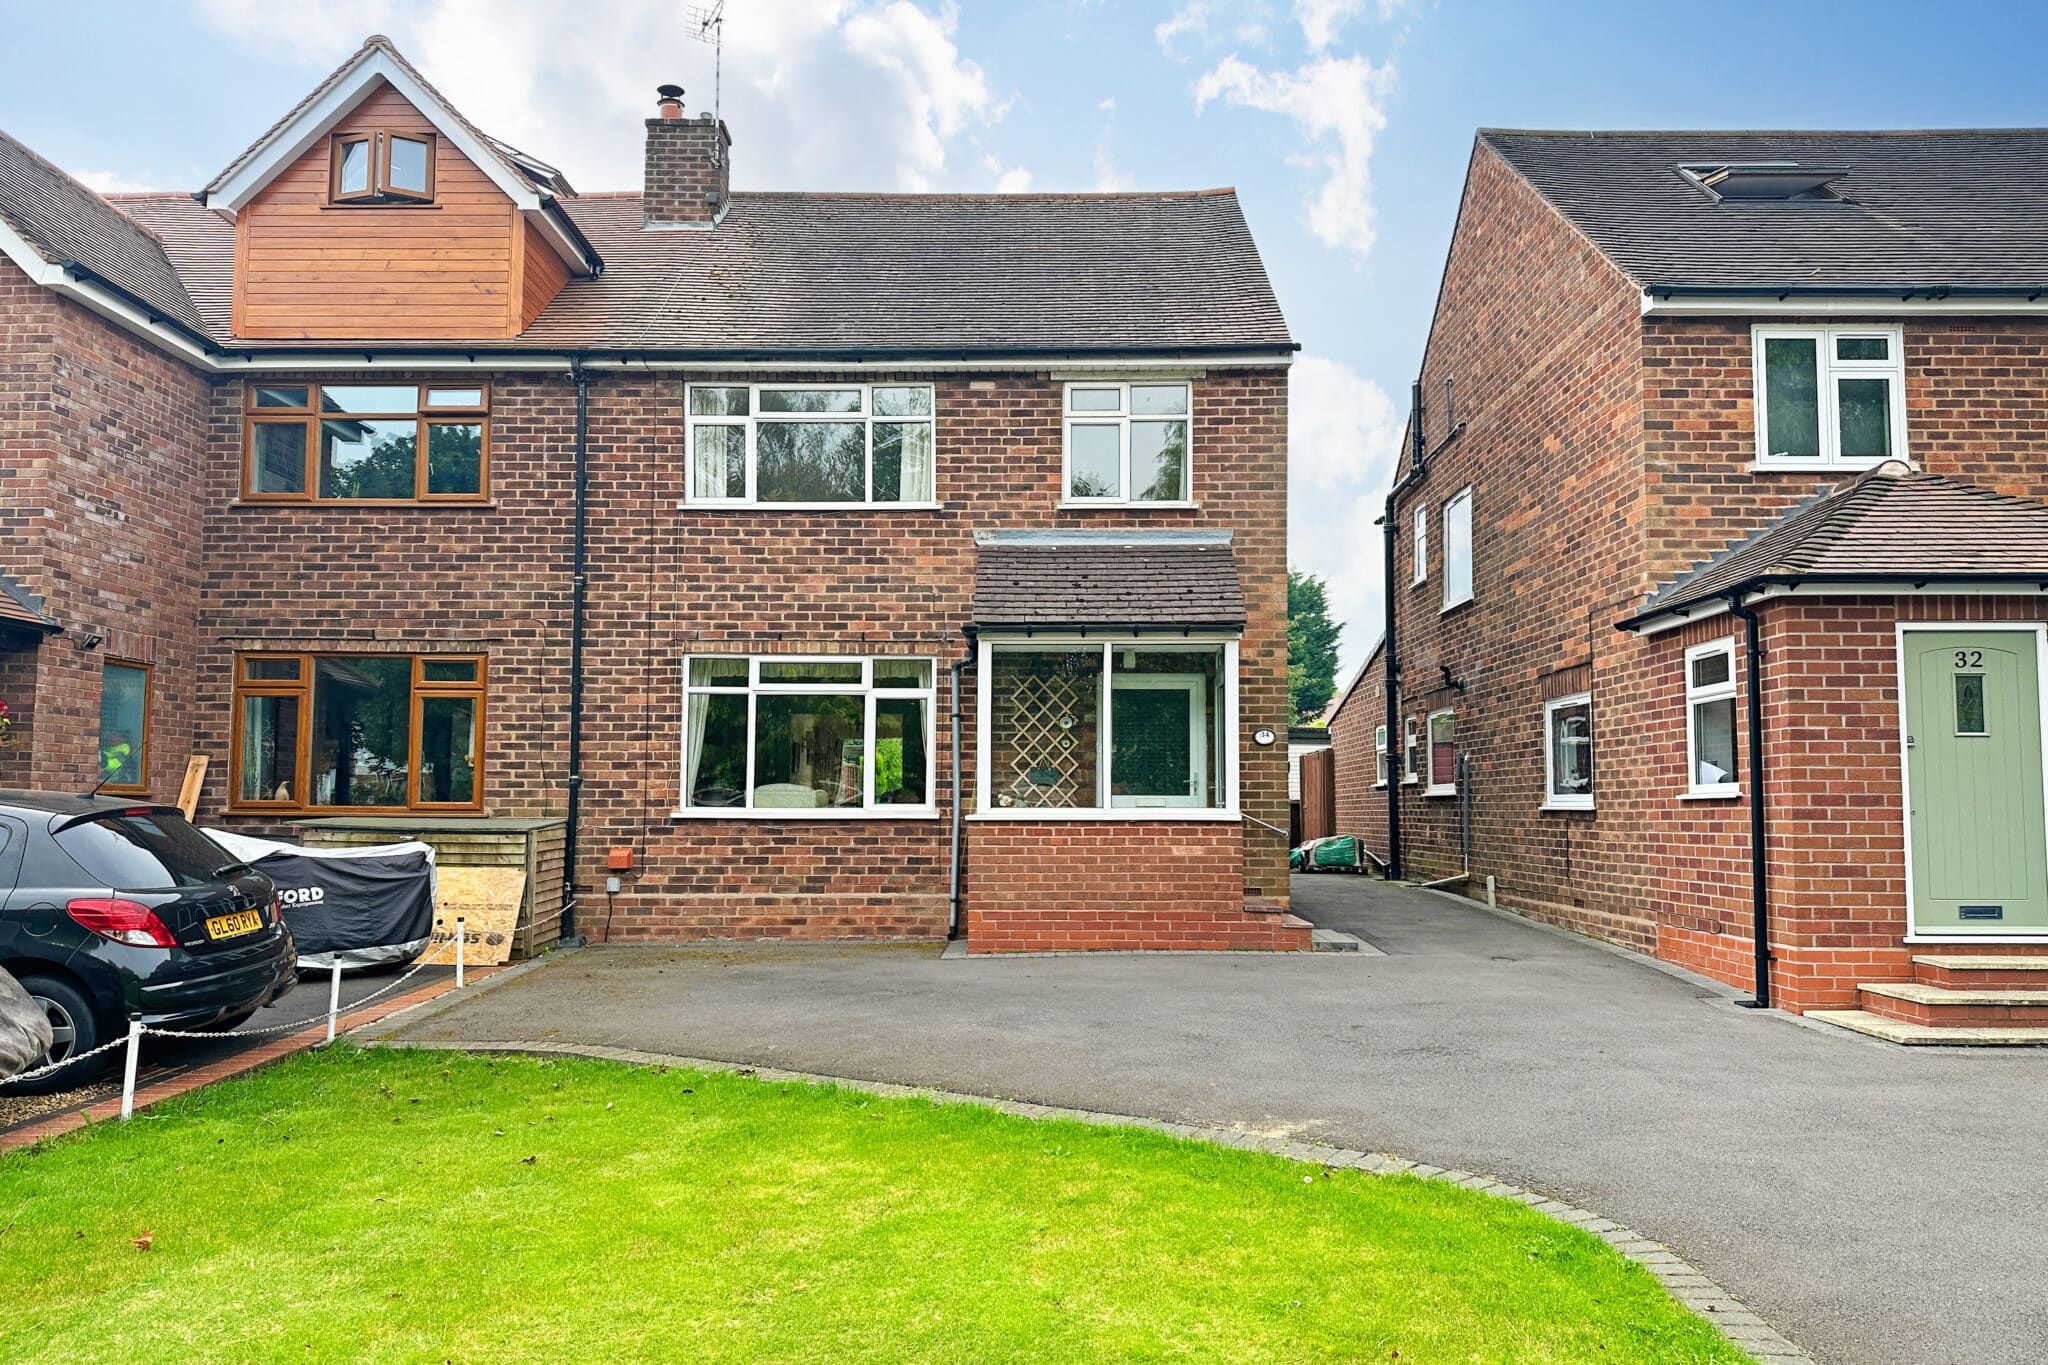 Arden Vale Road, Knowle, Solihull, Solihull, B93 9NR